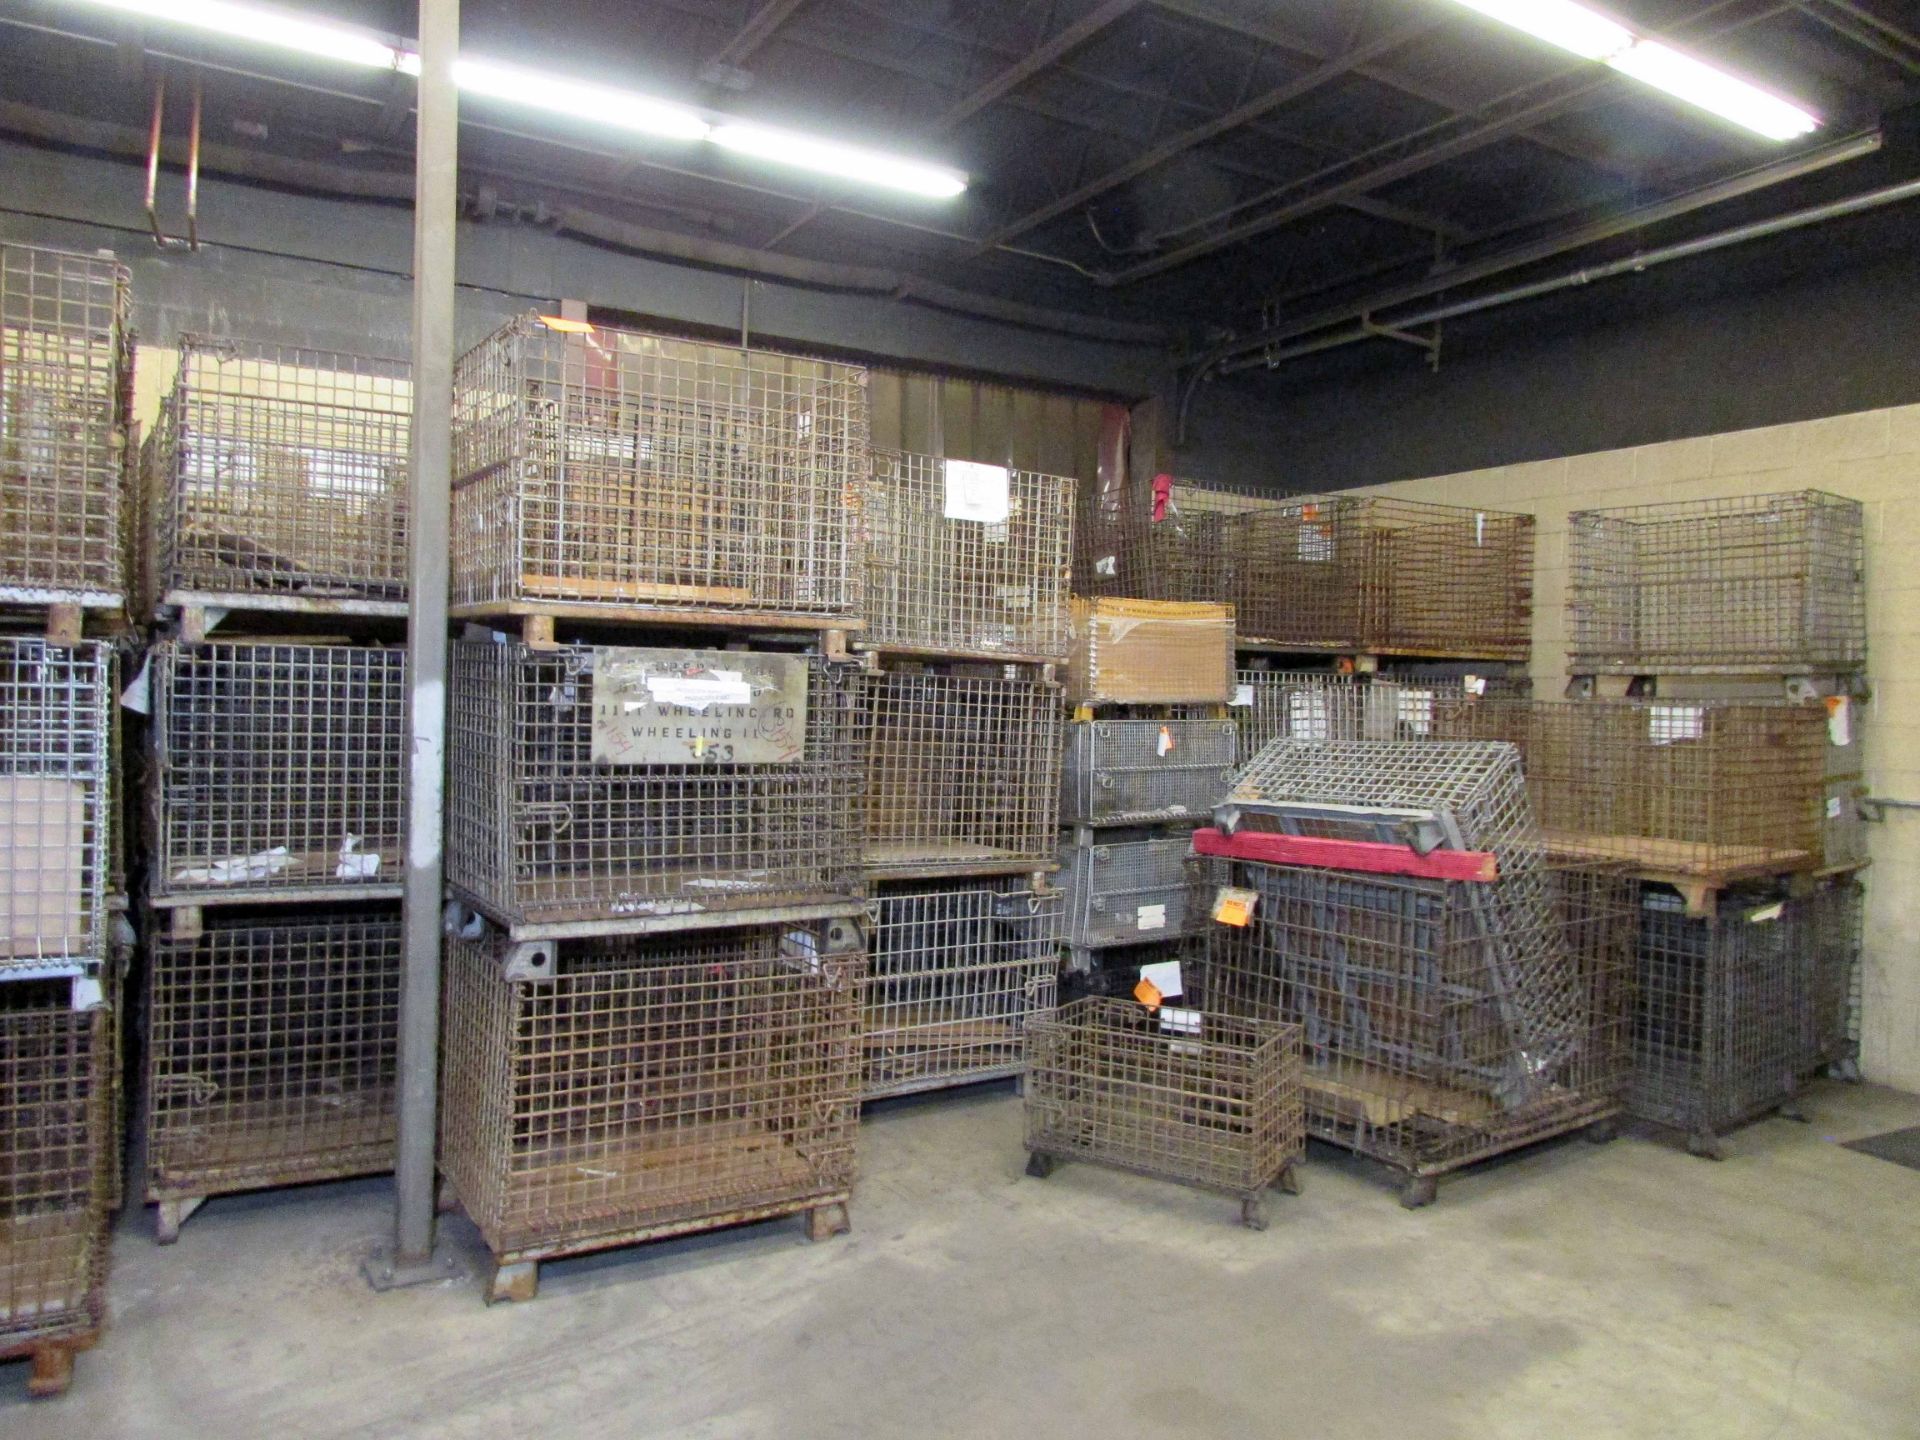 LOT OF COLLAPSIBLE WIRE BASKETS, large quantity & various sizes - Image 2 of 3